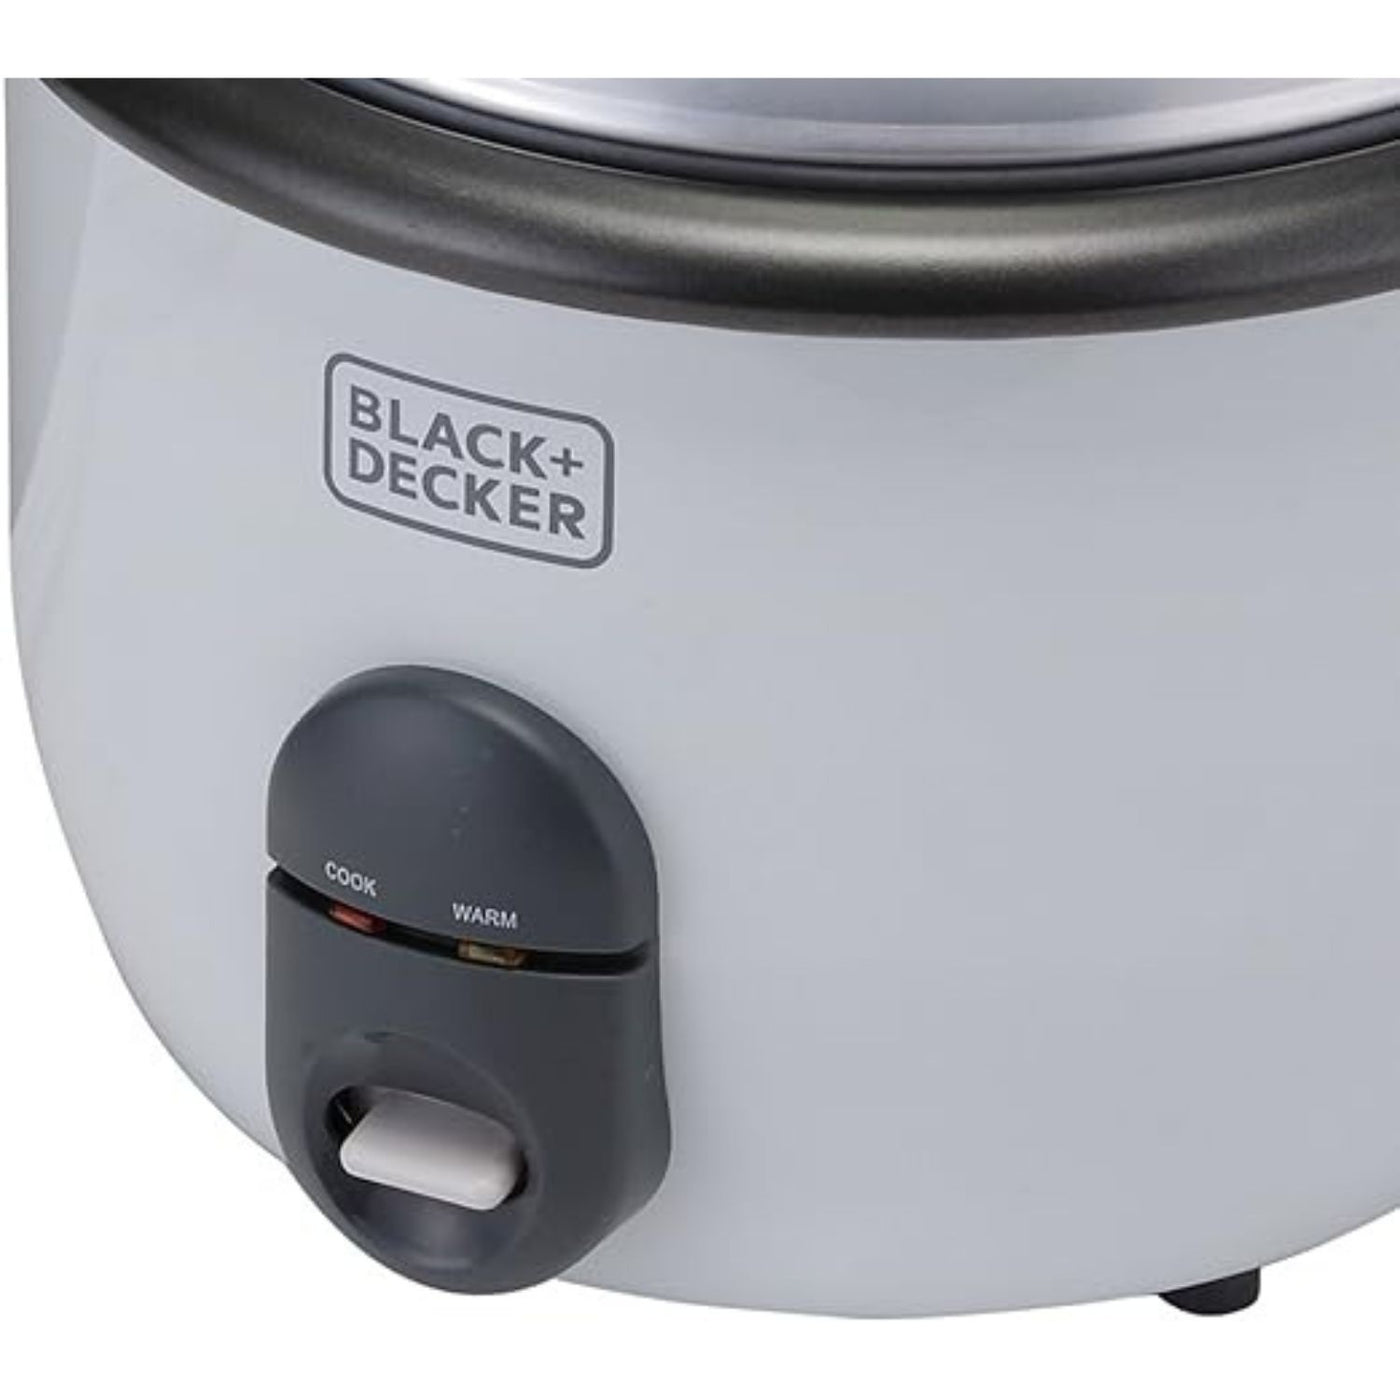 700W 1.8L 2-in-1 Non-Stick Rice Cooker with Steamer